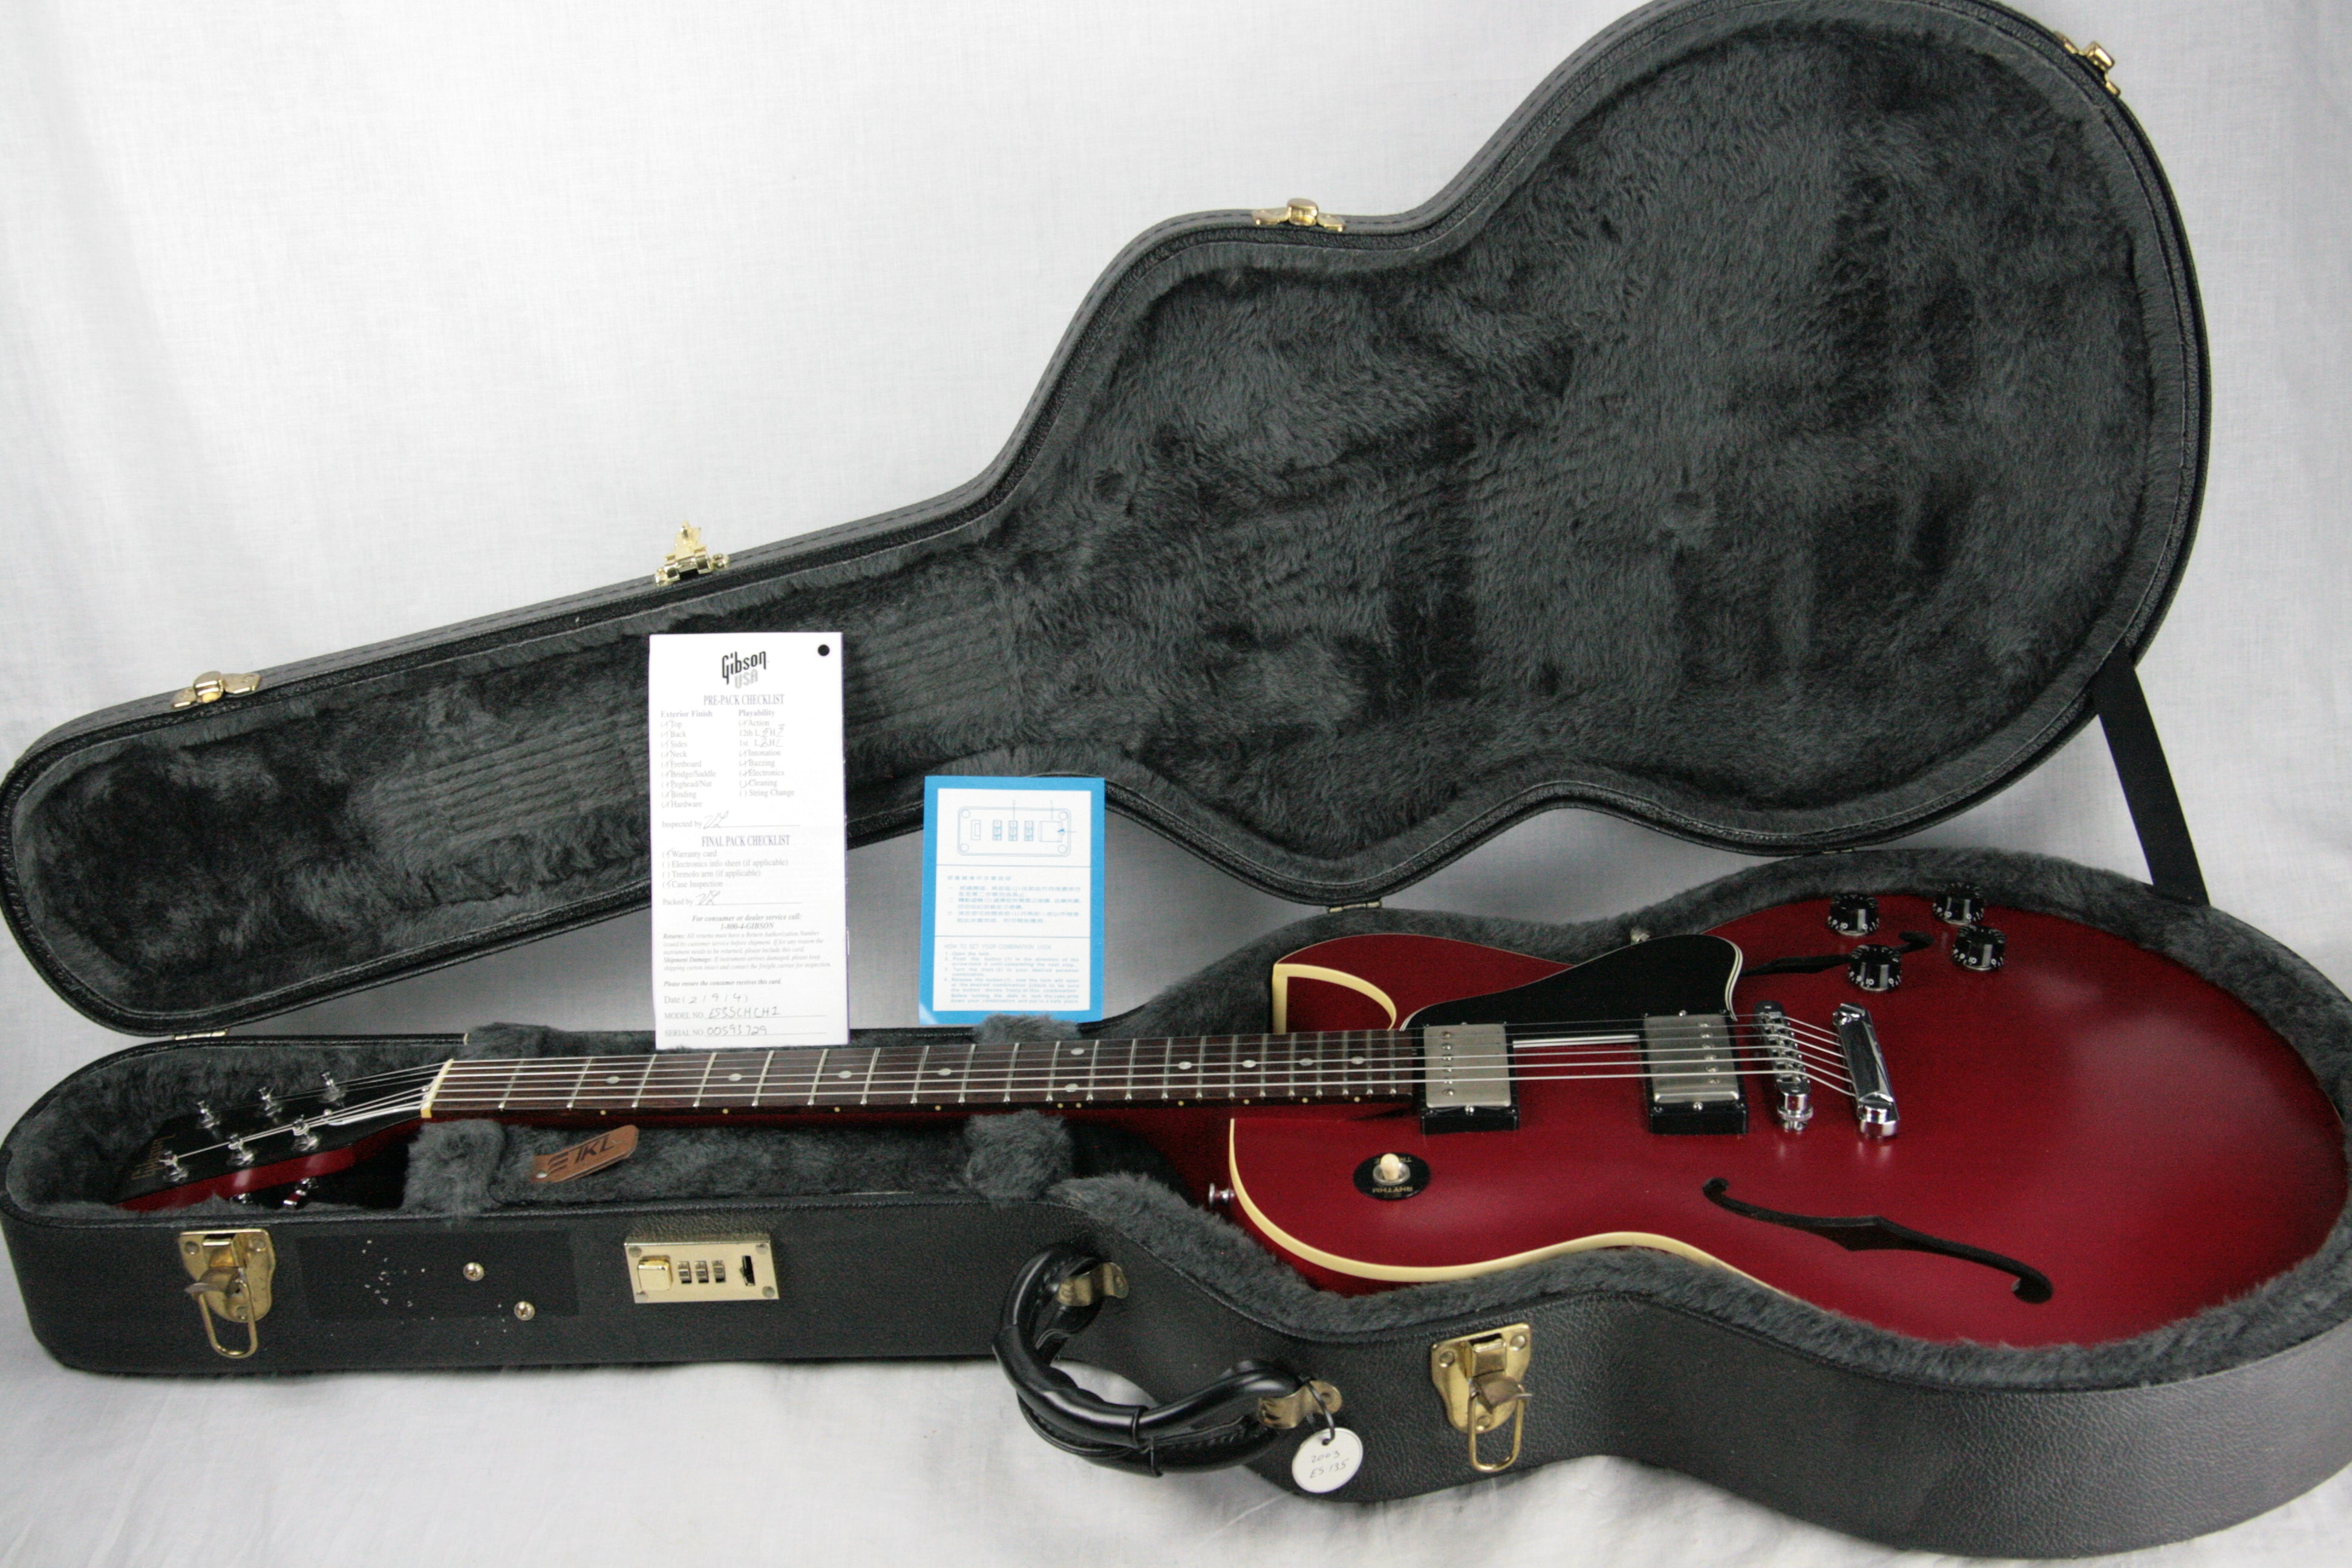 *SOLD*  2003 Gibson ES-135 Satin Cherry Red Semi-Hollowbody Guitar Dimarzio PAF's! 335